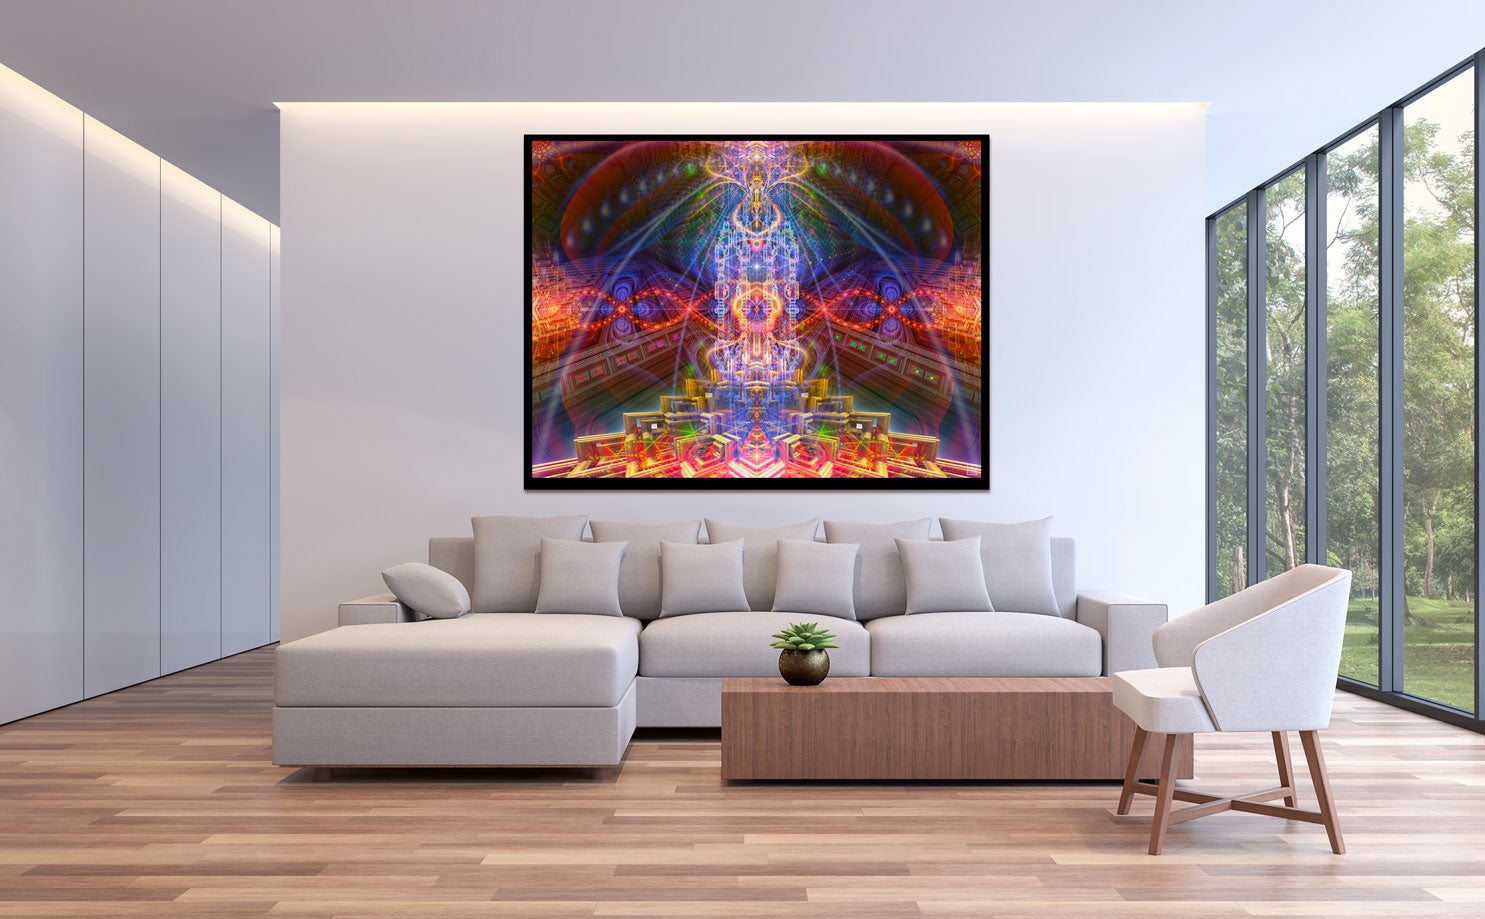 Psychedelic Tapestry